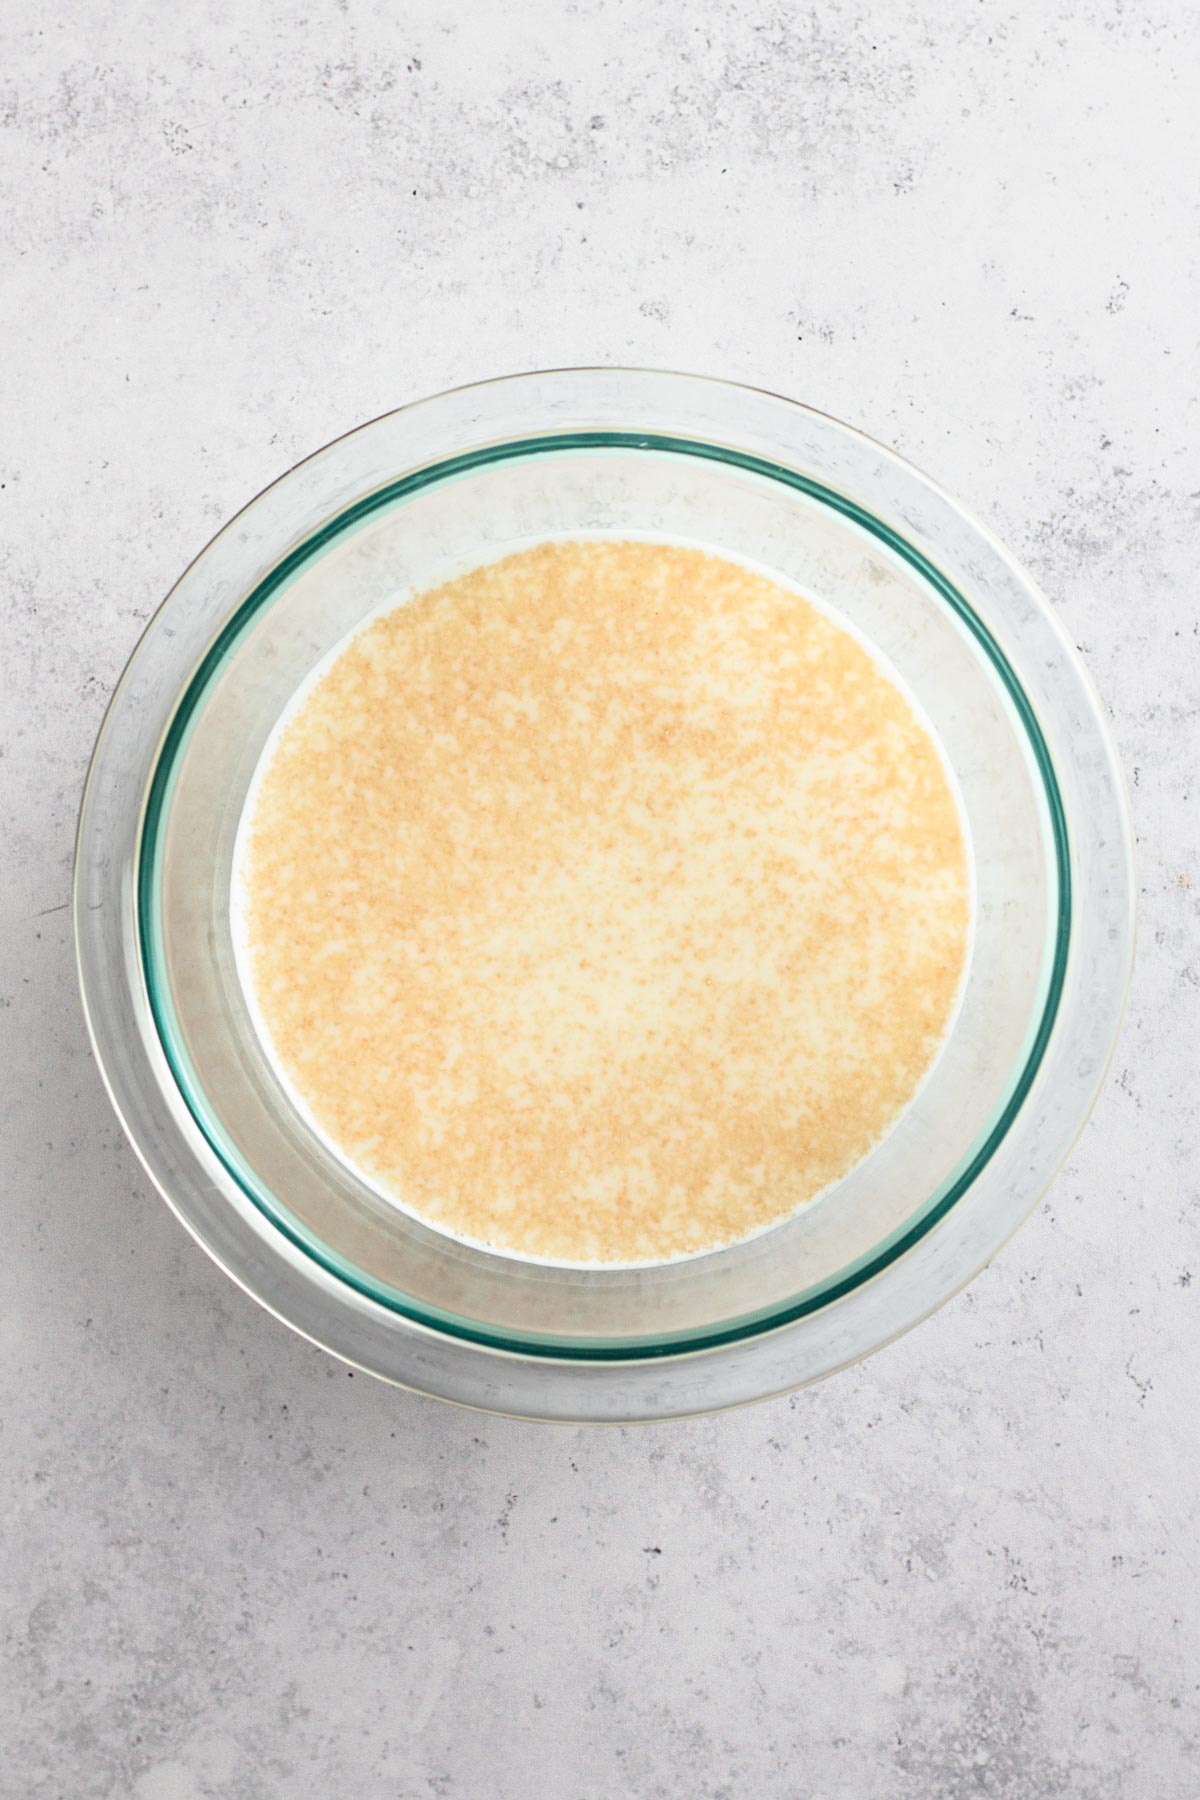 milk and foamy yeast in a glass bowl